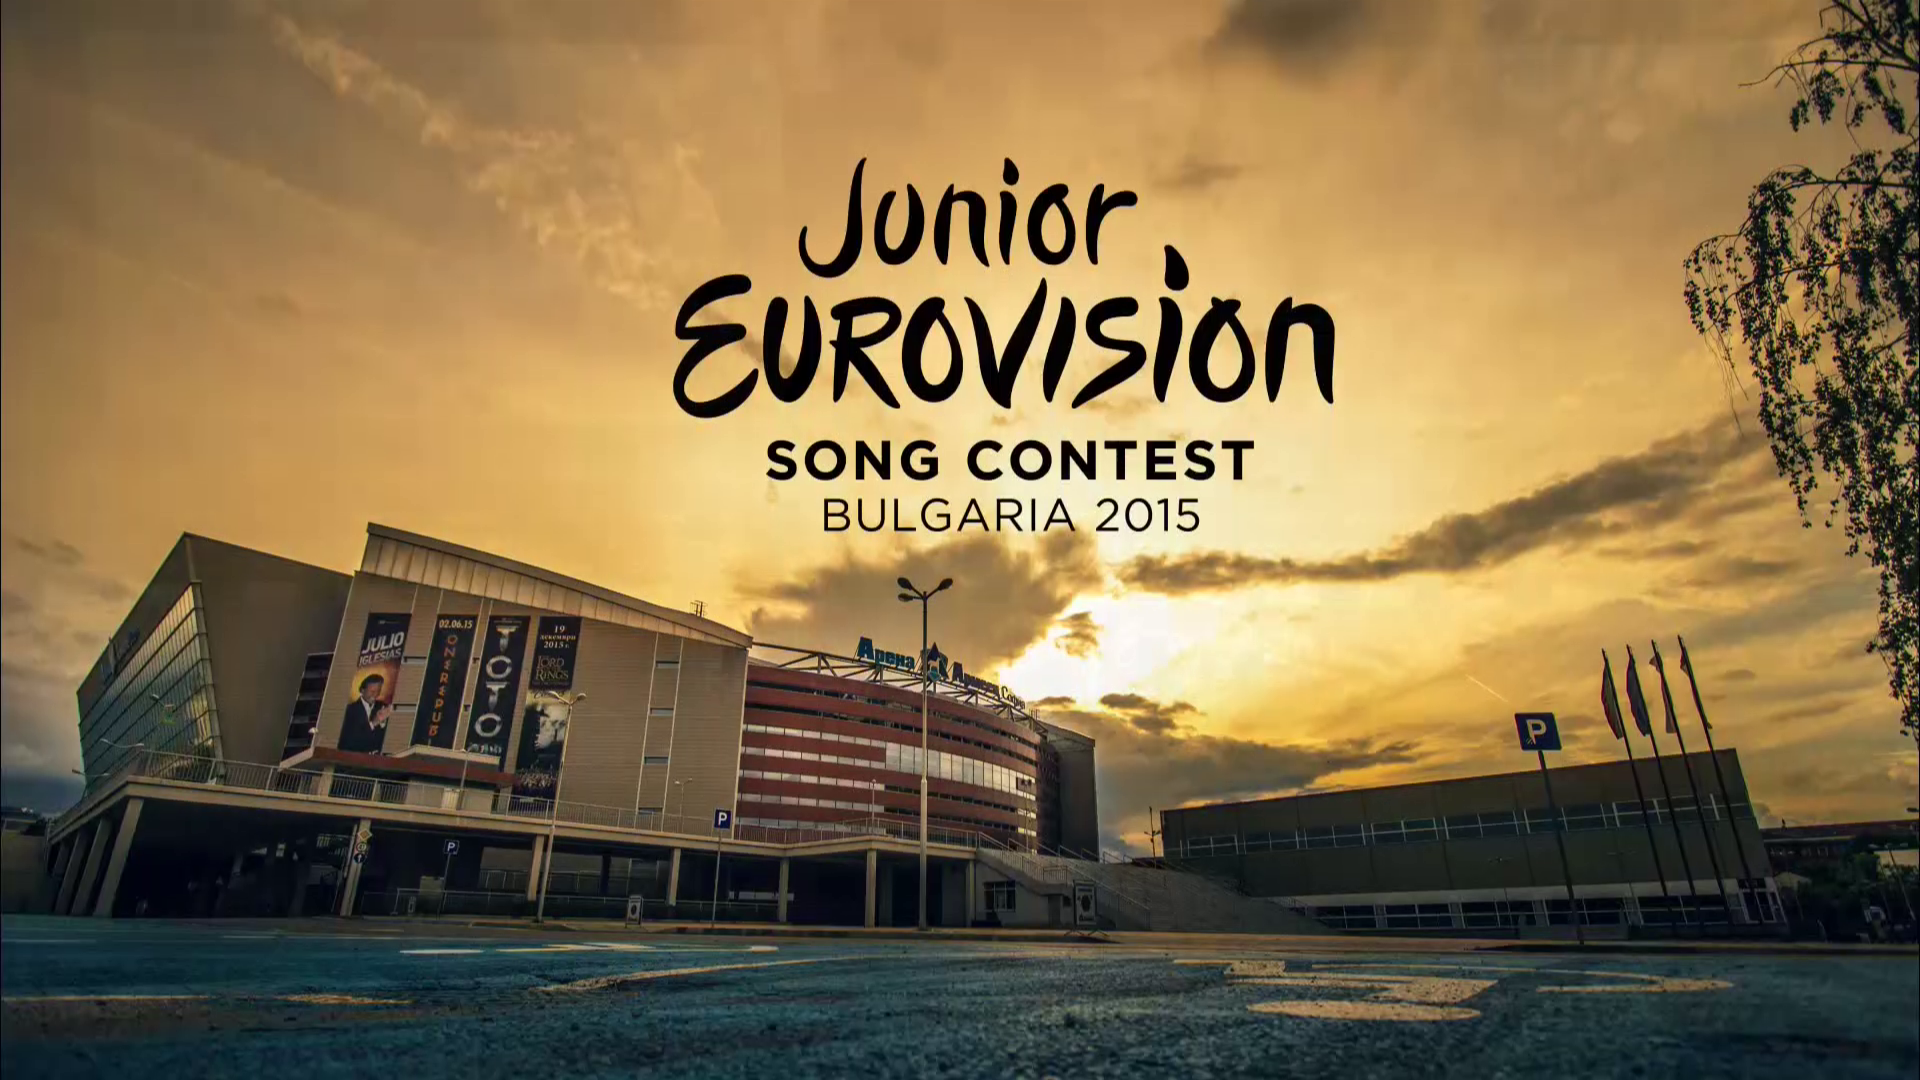 Bulgarian government approves budget for Junior Eurovision 2015